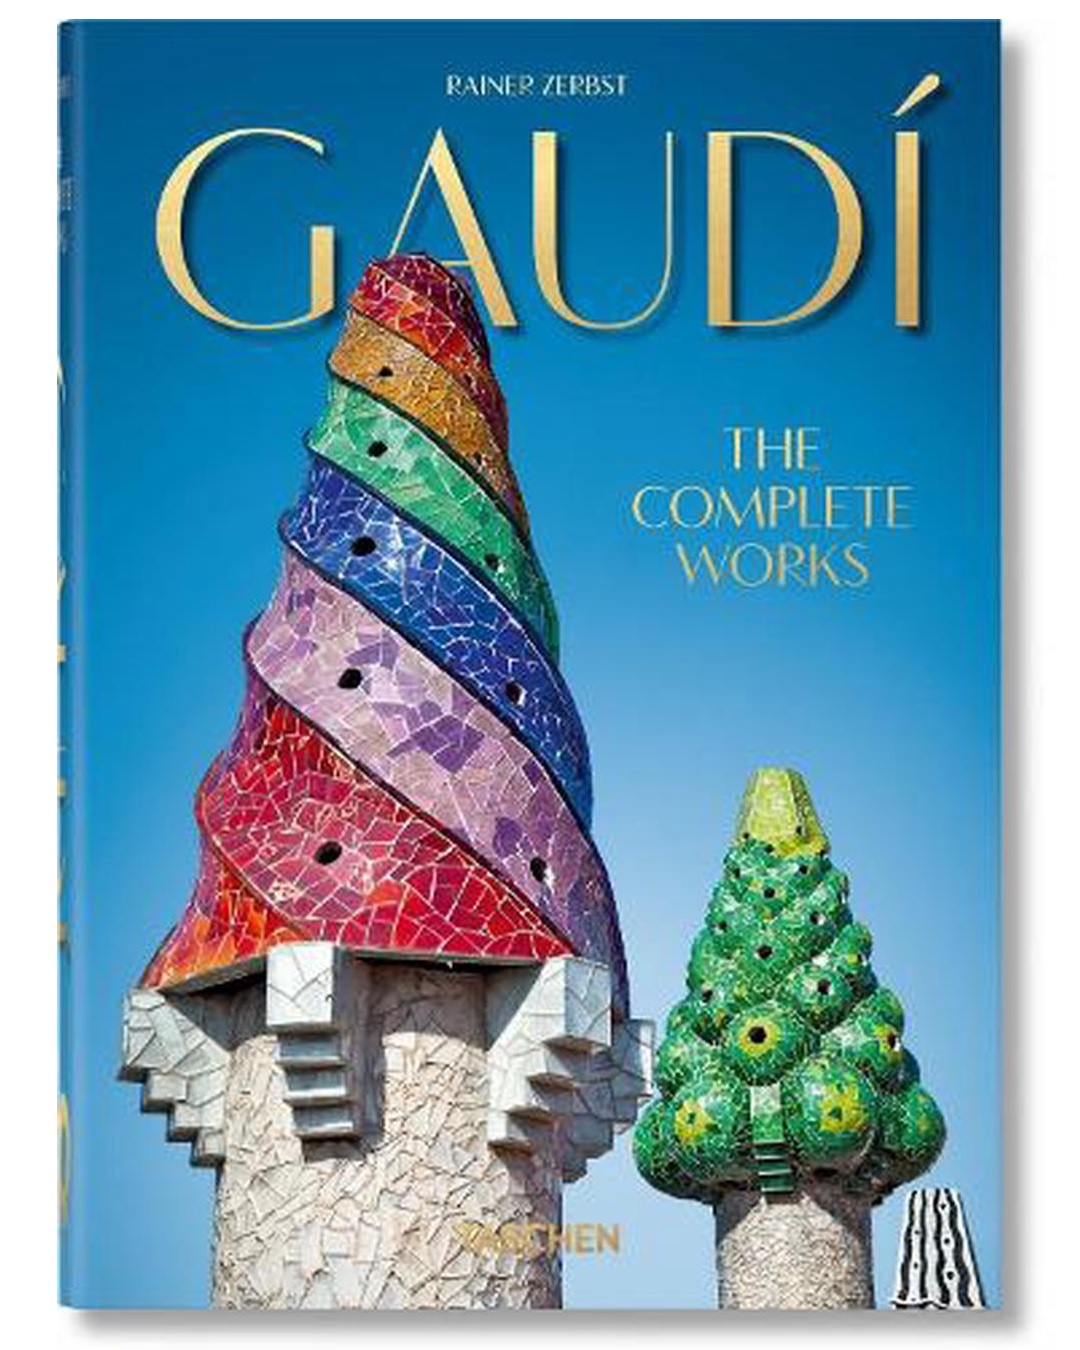 Gaudi the complete works book